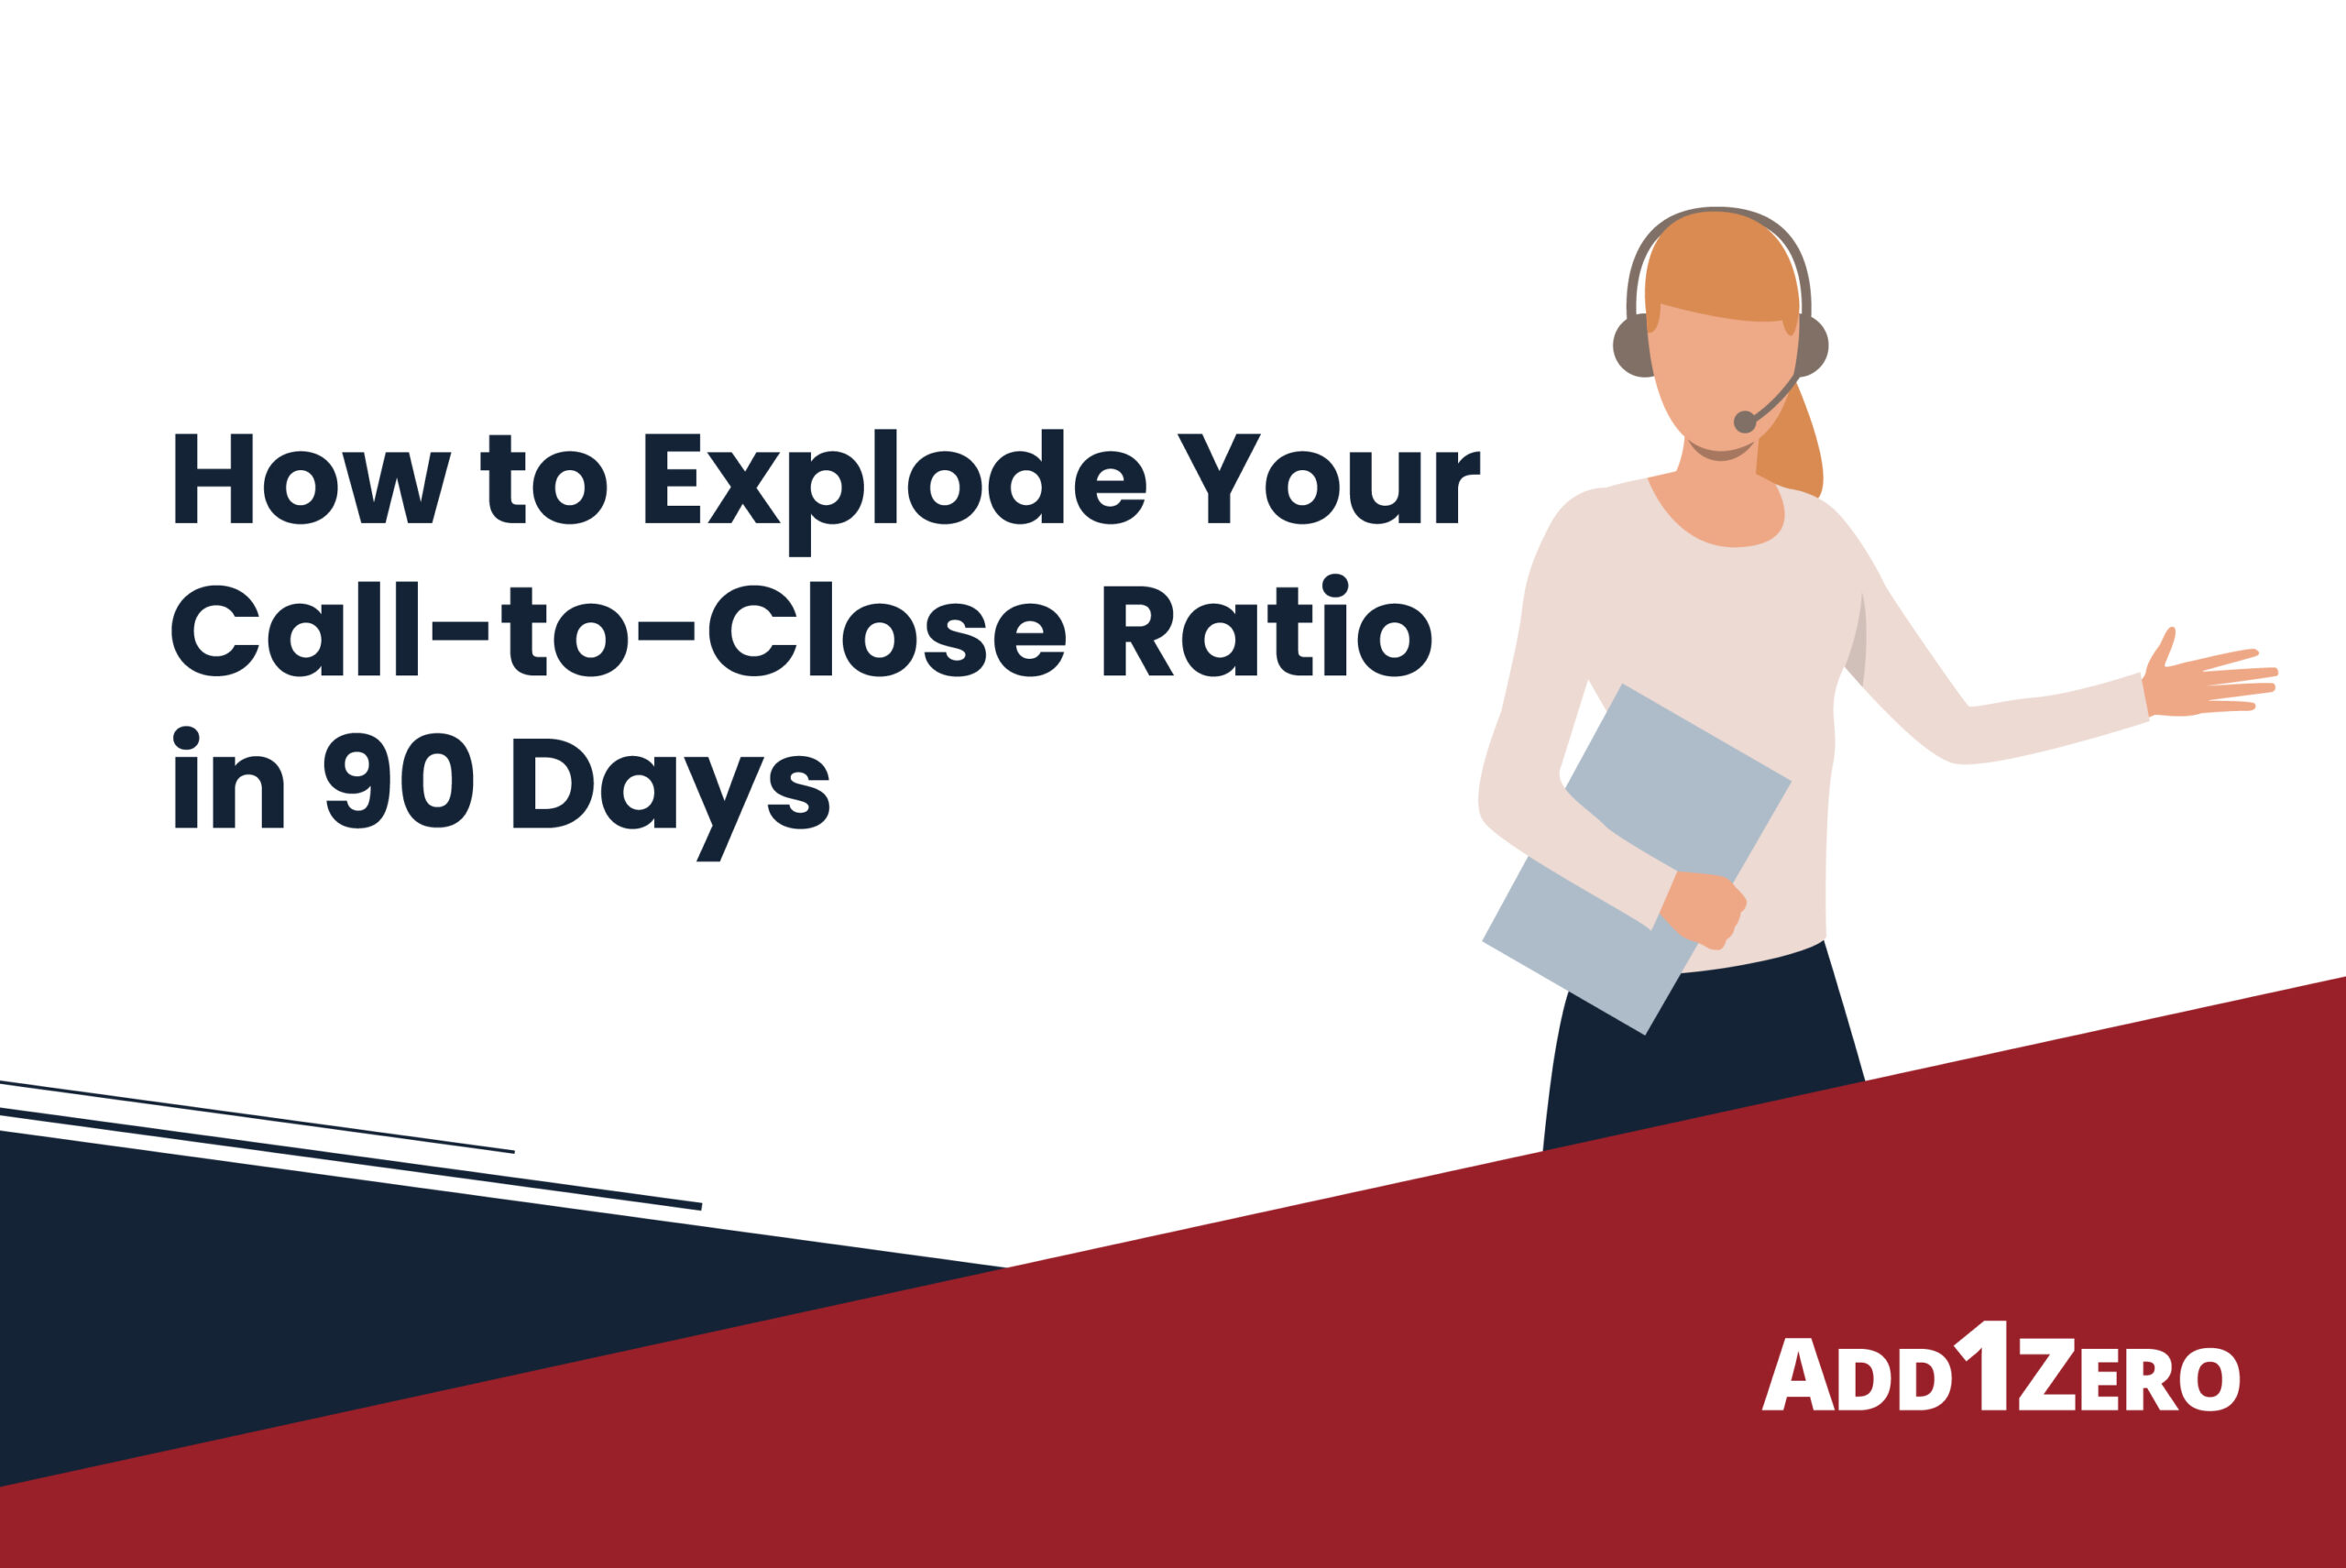 How to Explode Your Call-to-Close Ratio in 90 Days